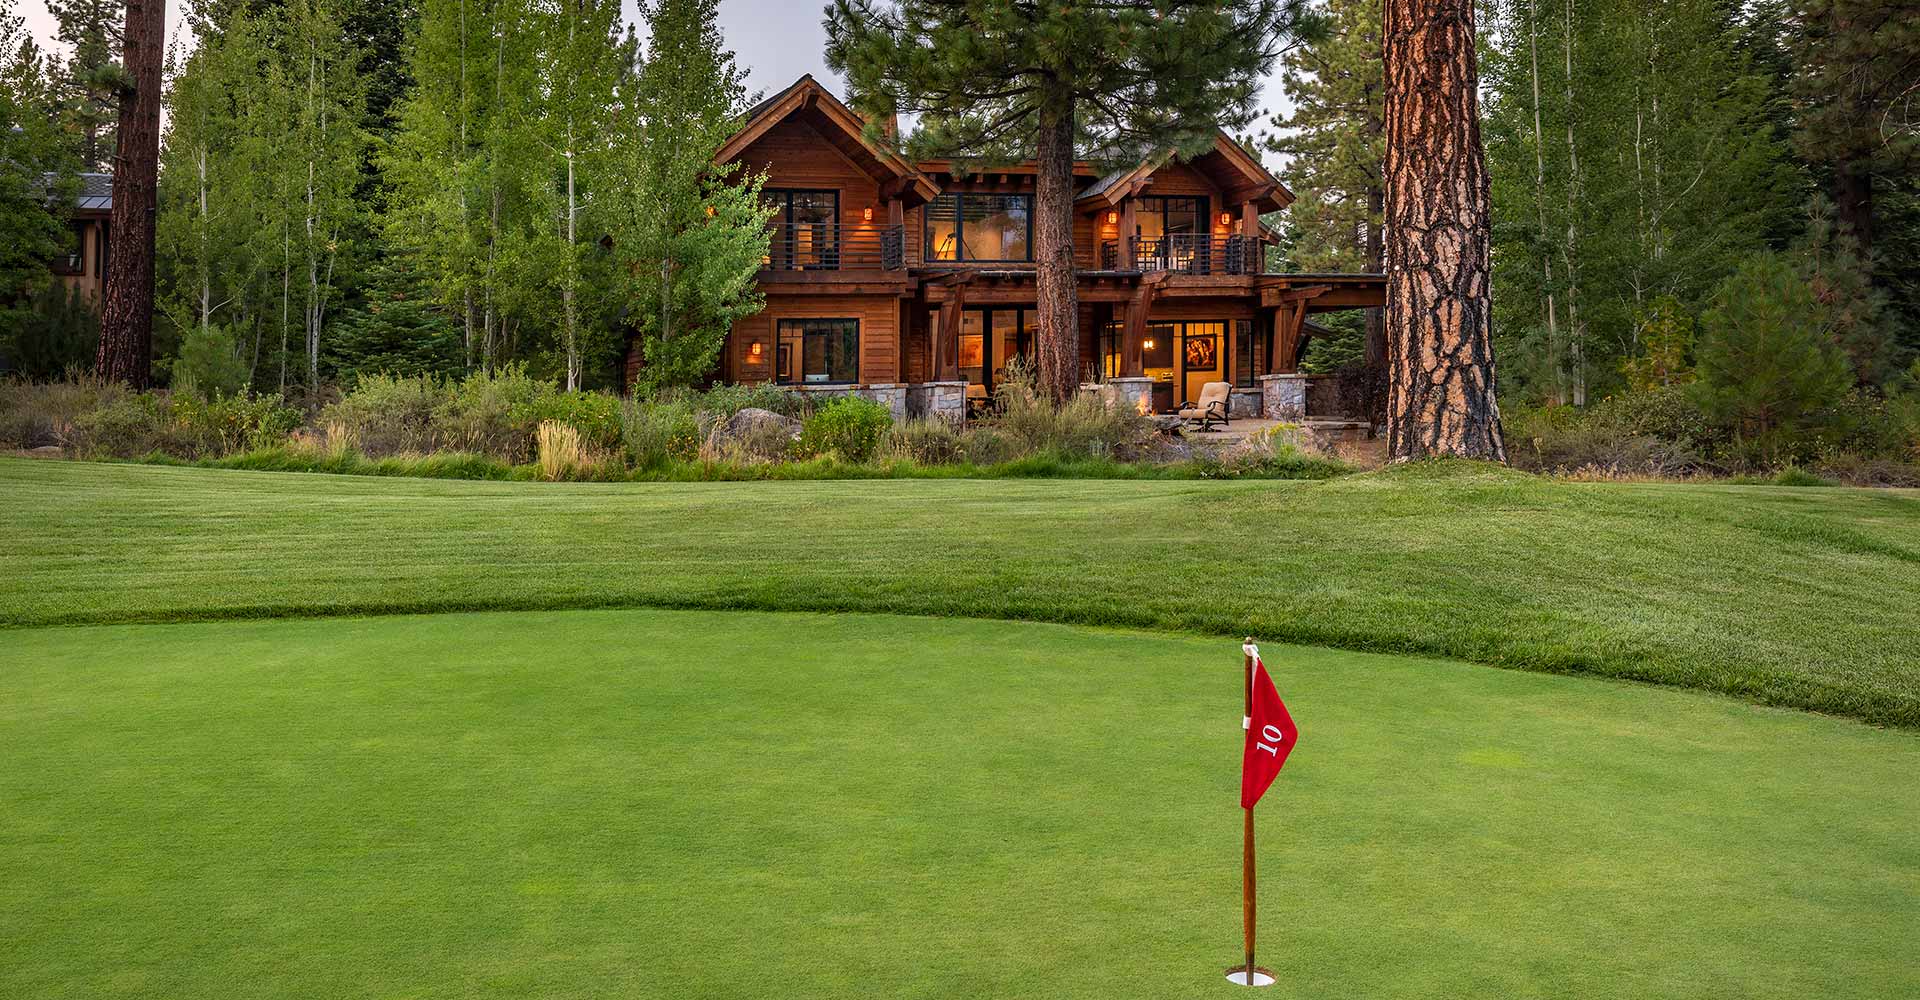 Truckee Luxury Homes for sale - 10295 Olana Drive